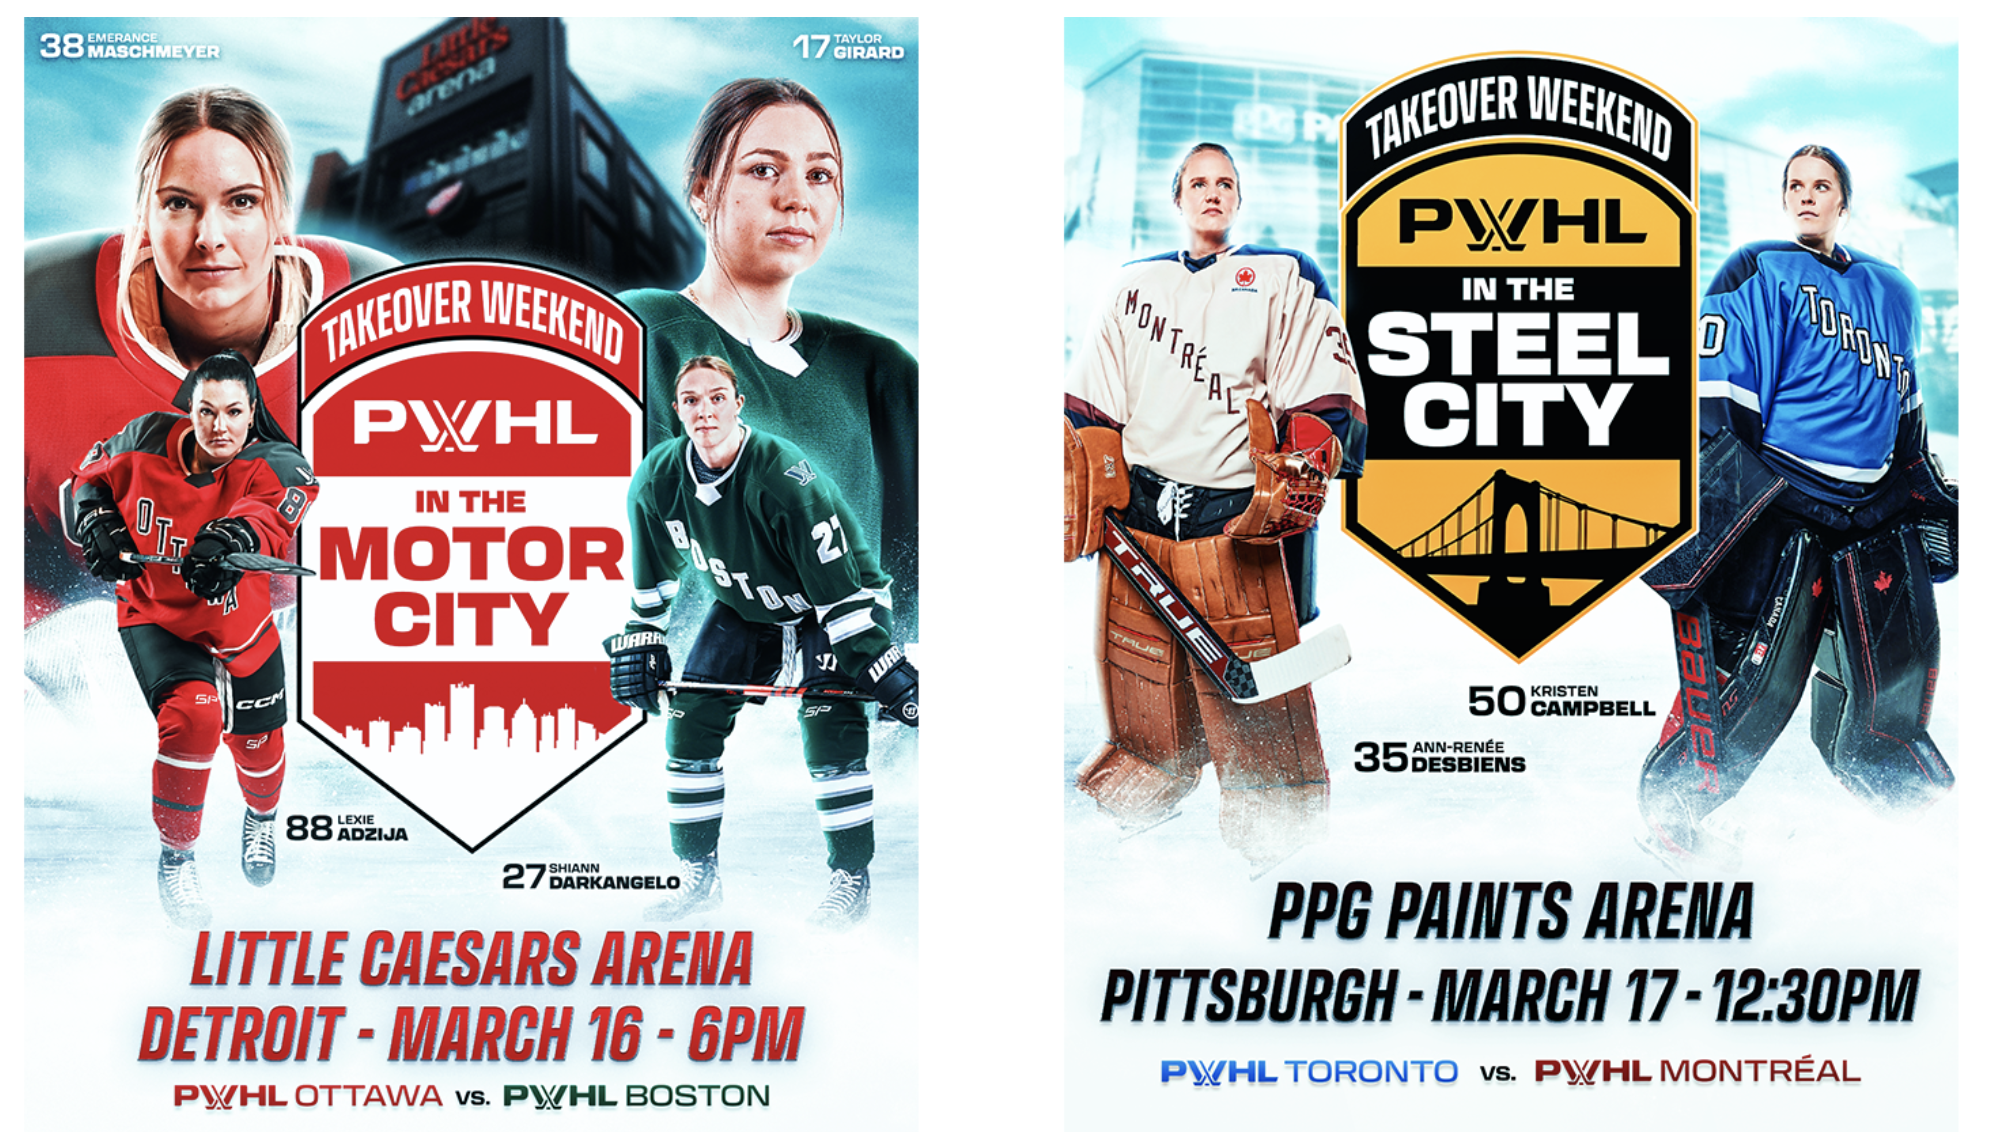 PWHL Announces "Takeover Weekend"